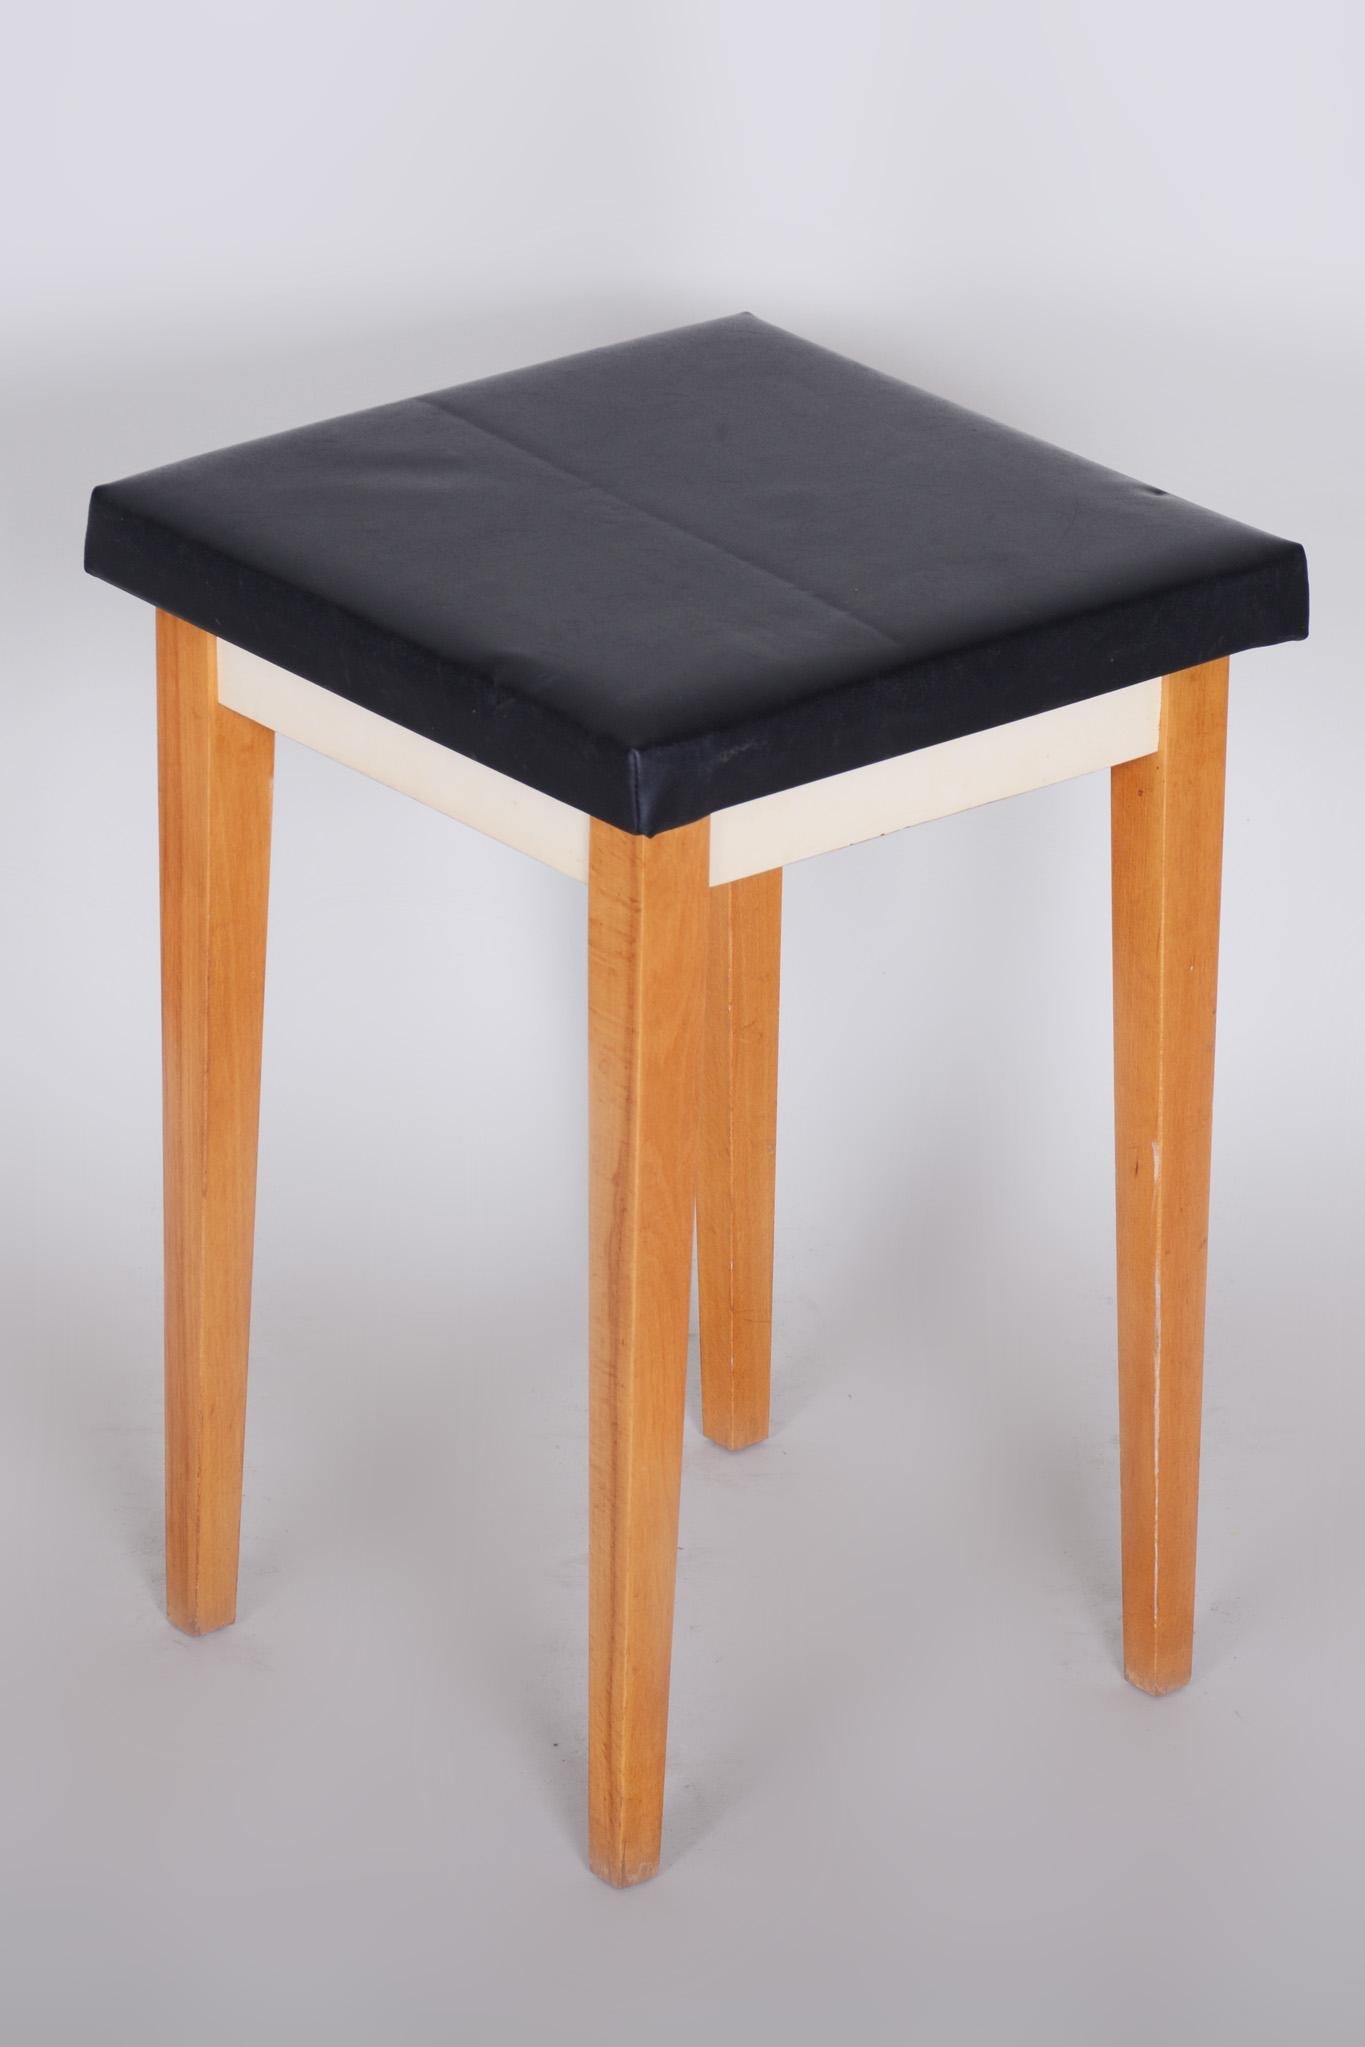 Czech Black Midcentury Beech Stool, 1950s, Original Preserved Condition For Sale